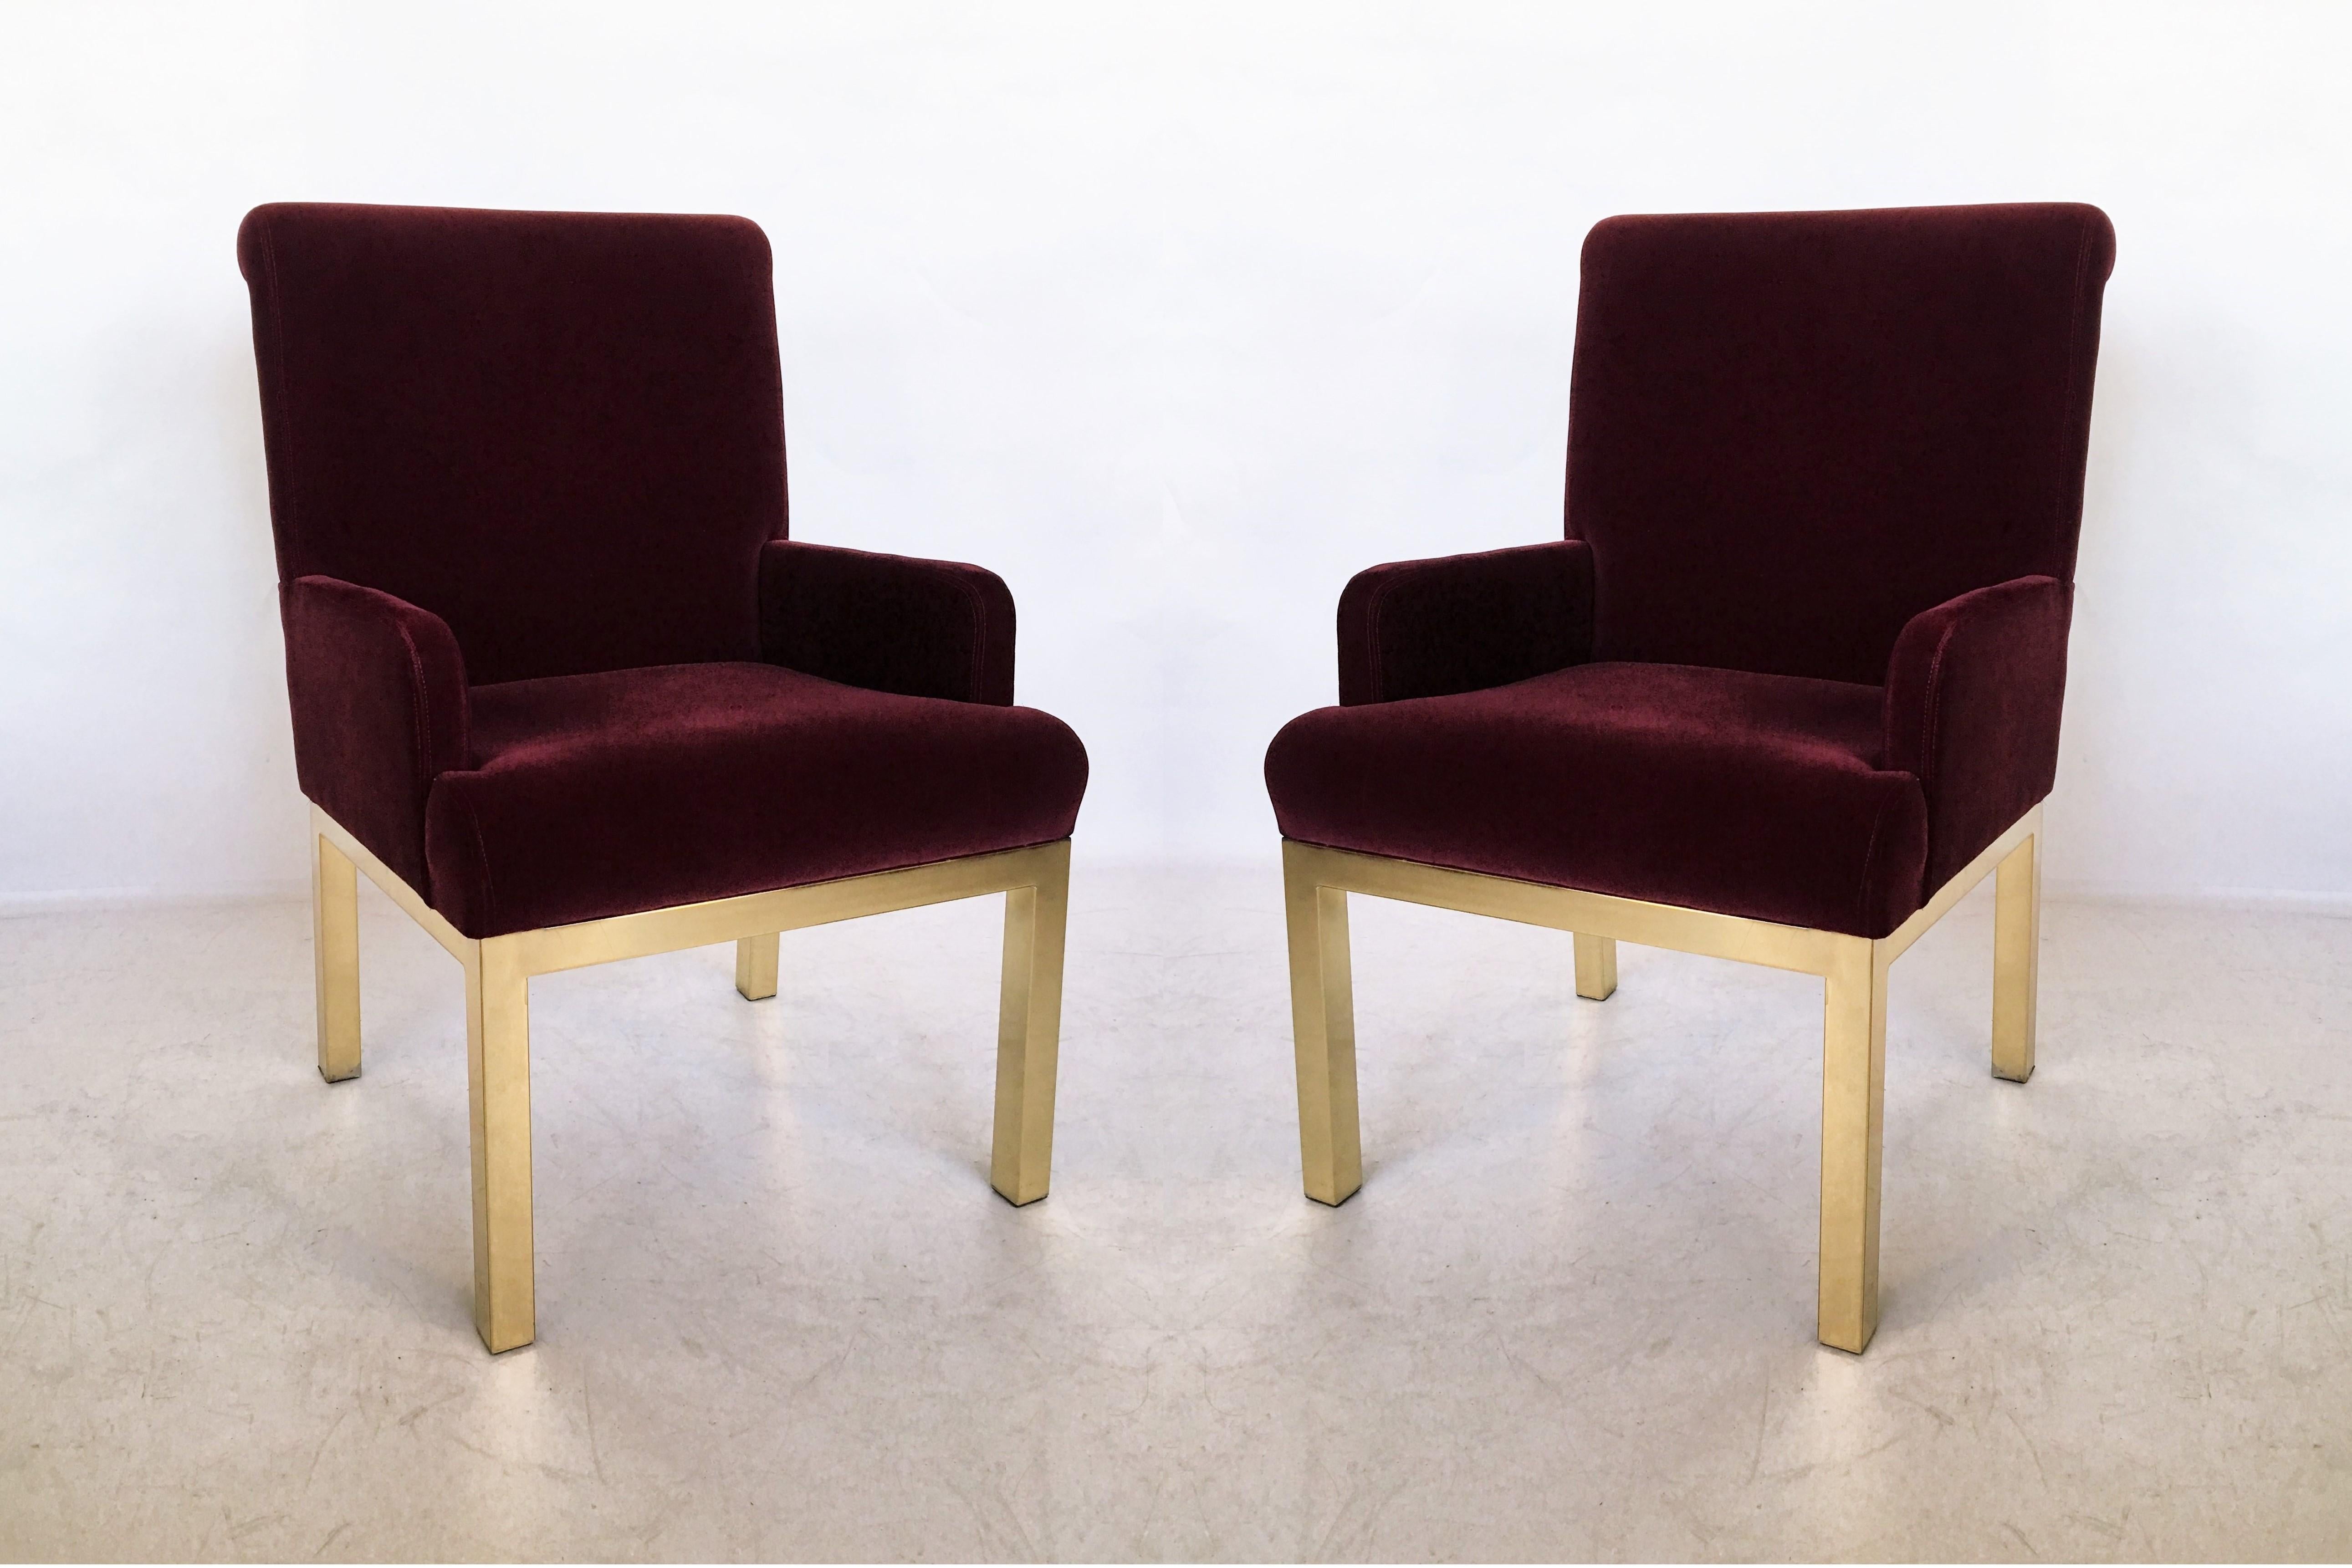 This attractive set of eight Mid-Century Modern brass dining chairs, Design Institute of America, and are a rare design. Ideal for a large dining table. Chairs are upholstered in their original velvet upholstery or you can choose to reupholster the